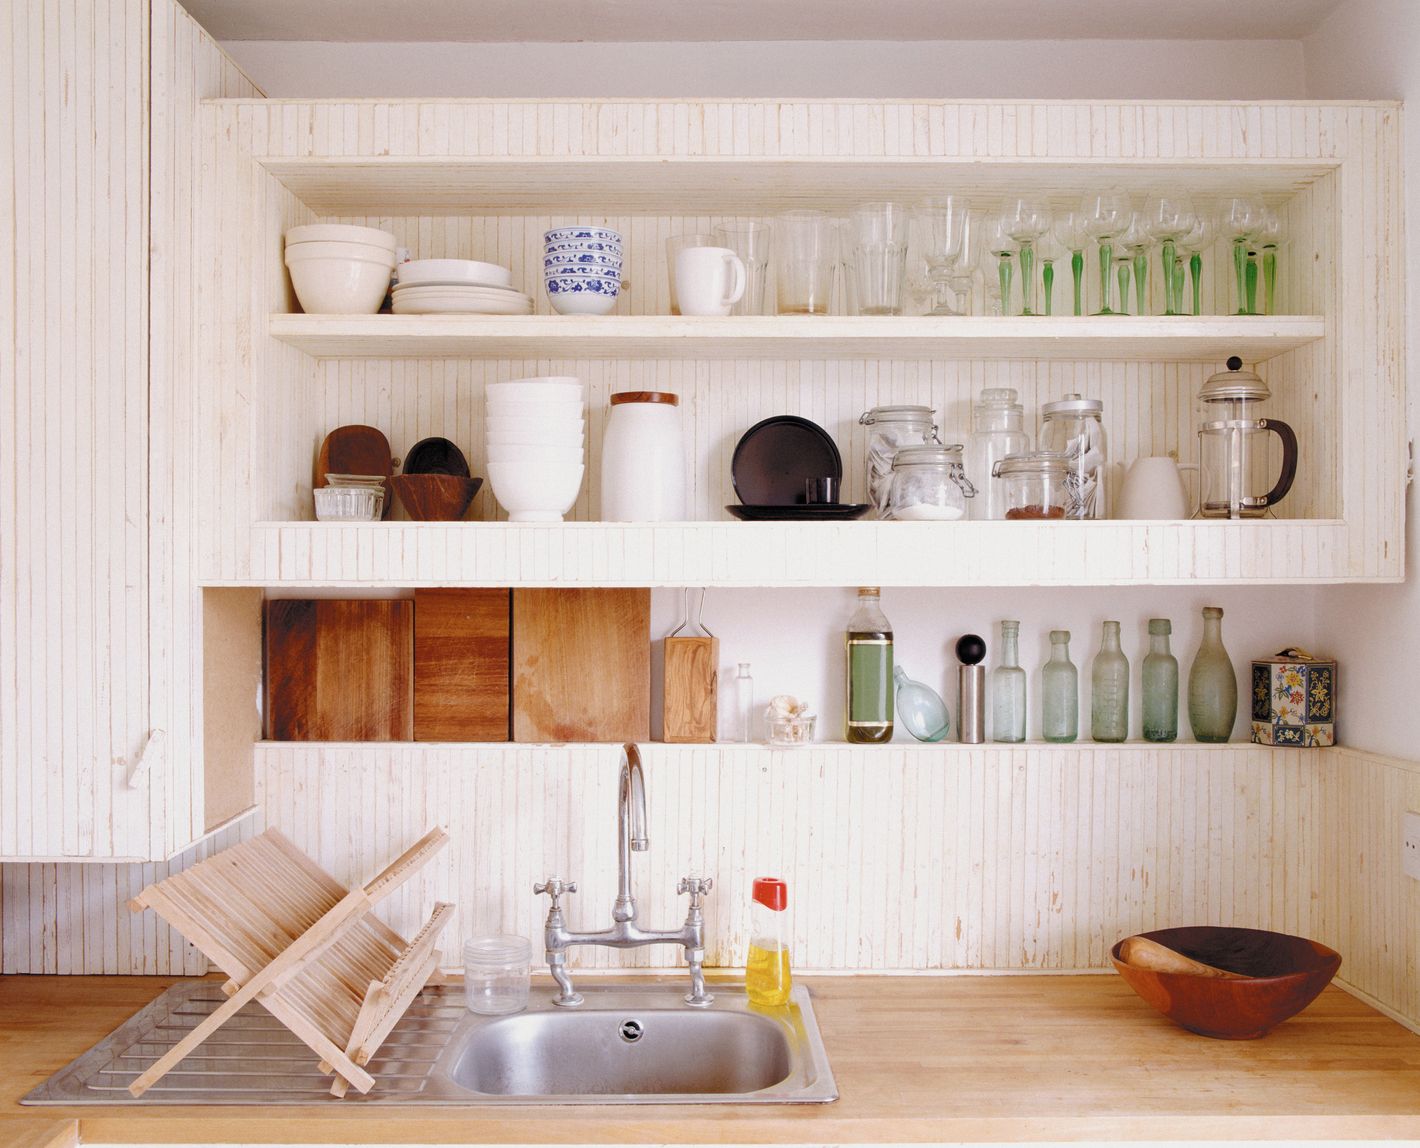 8 Tips for Organizing Your Pantry According to a Professional